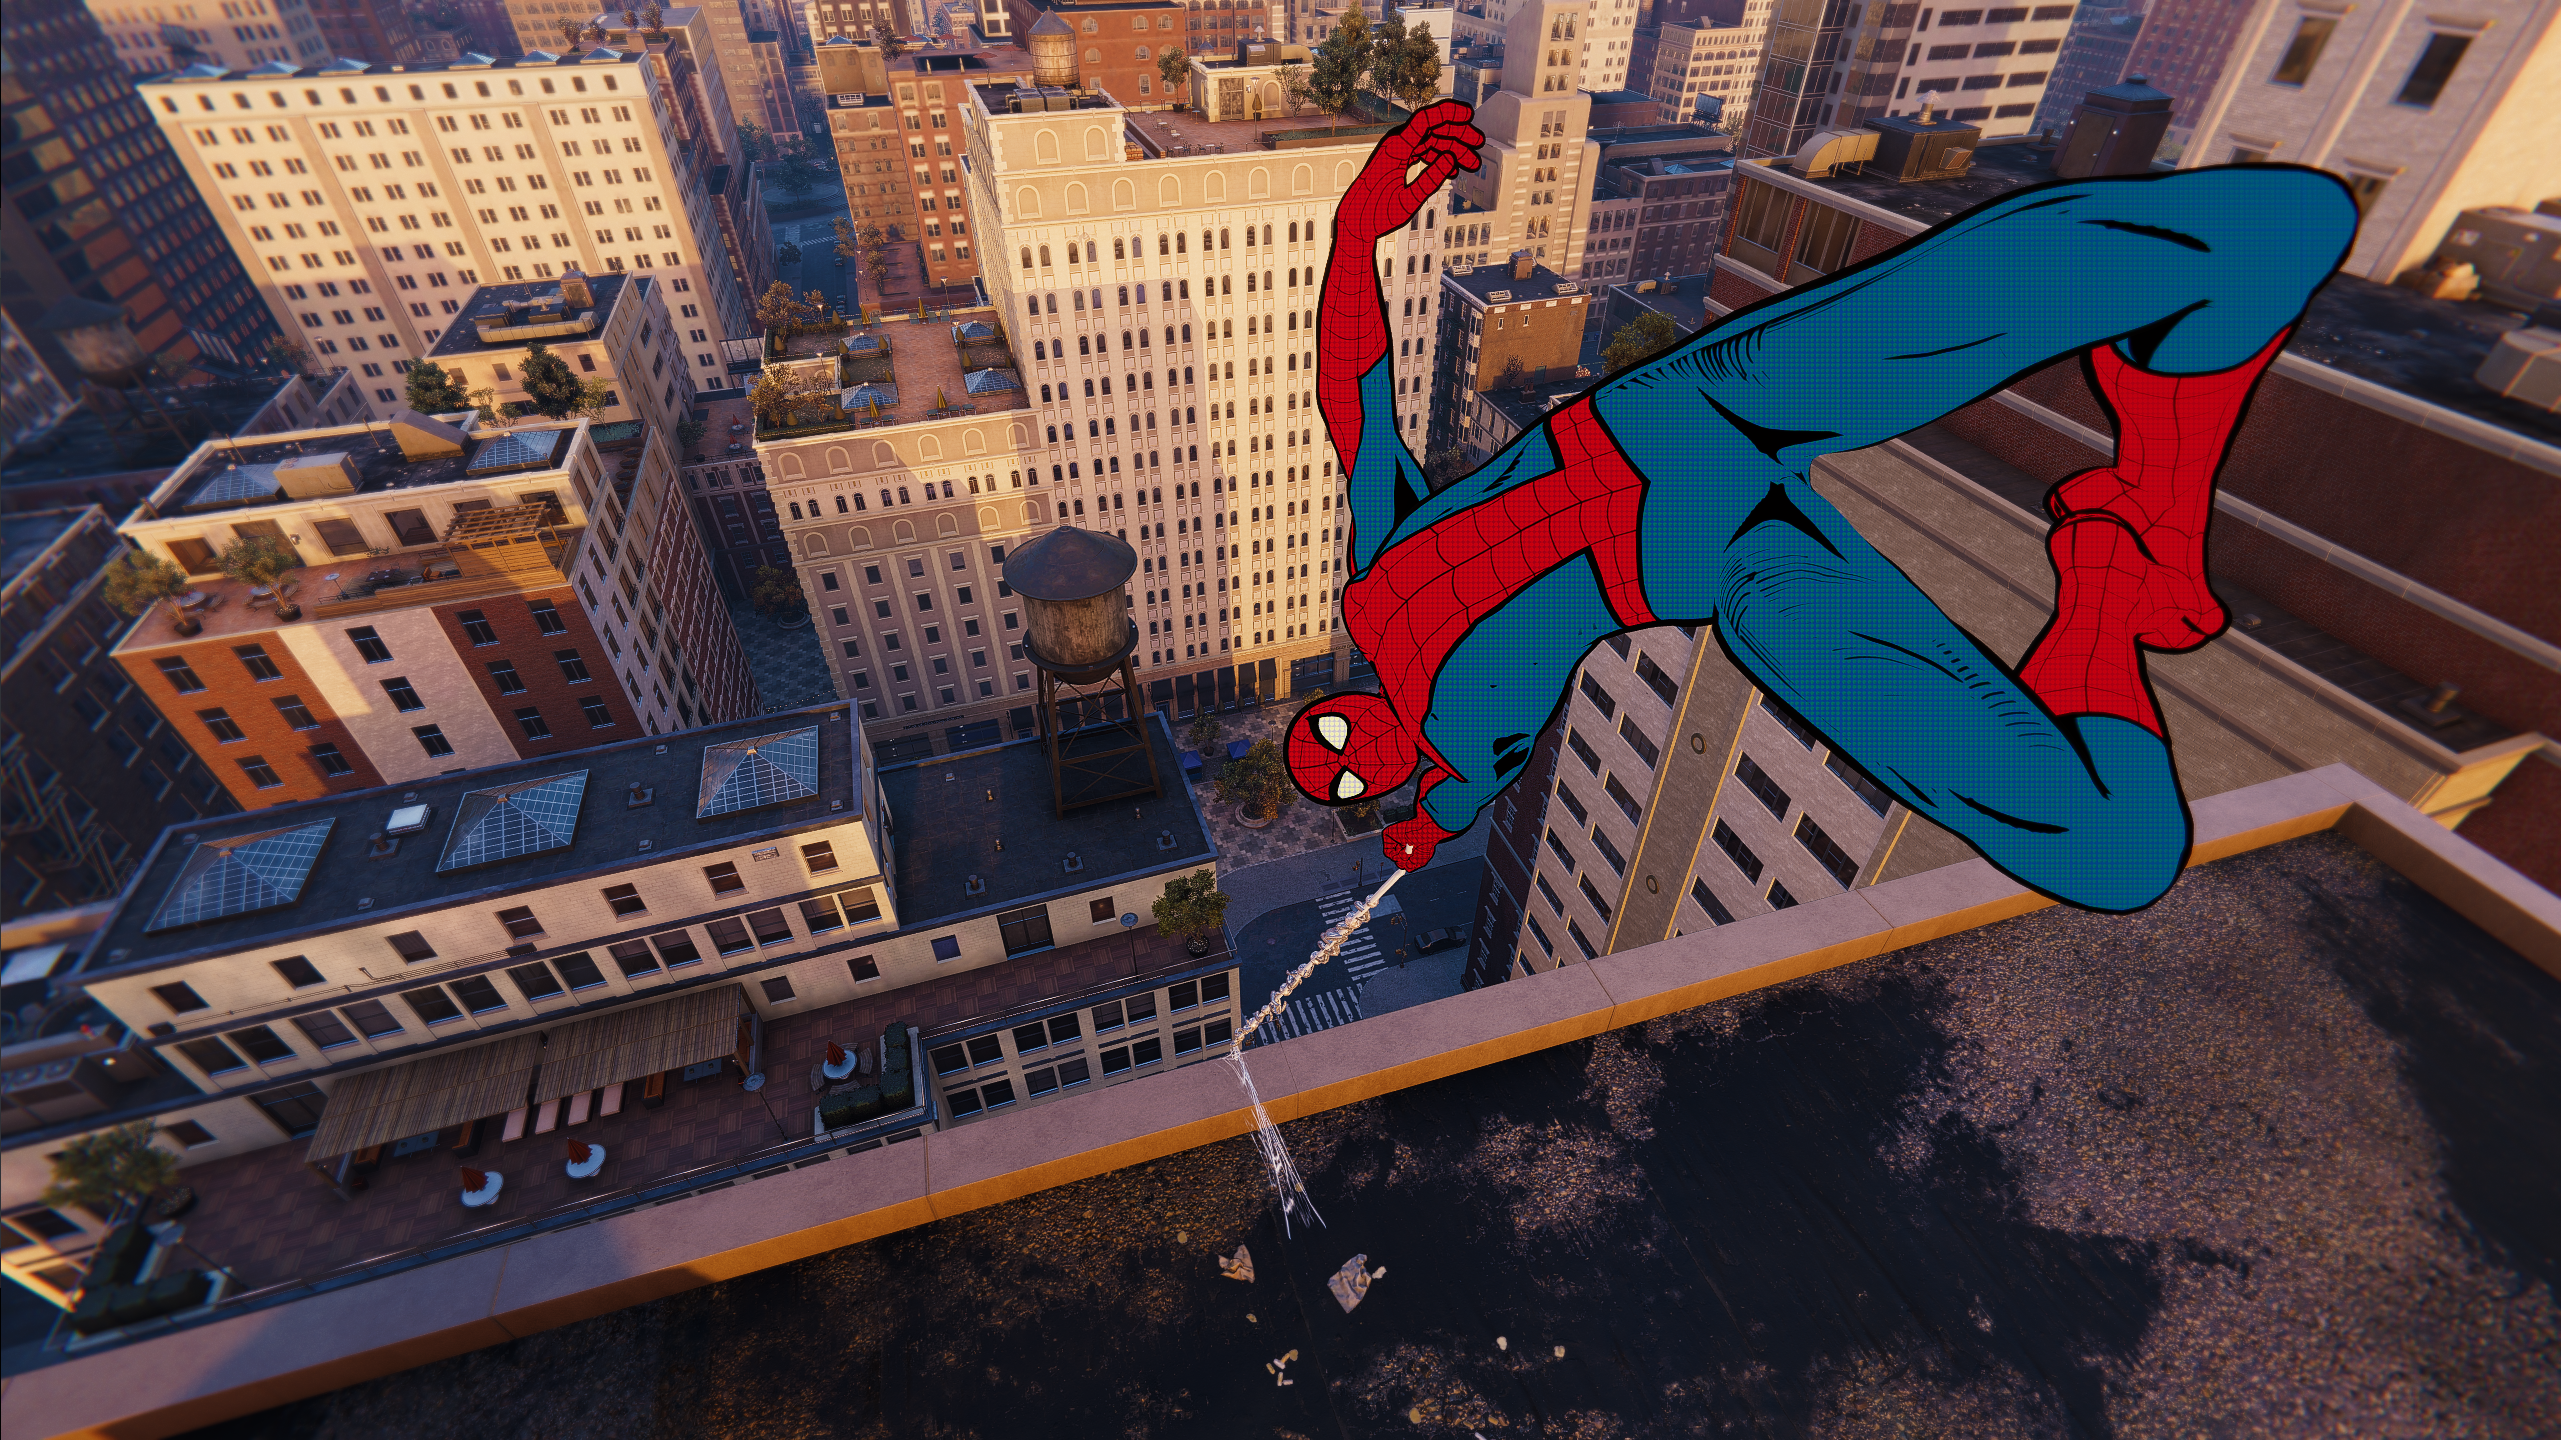 Spider-Man (Yuri Lowenthal) traverses the streets of New York in Marvel's Spider-Man Remastered (2022), Insomniac Games